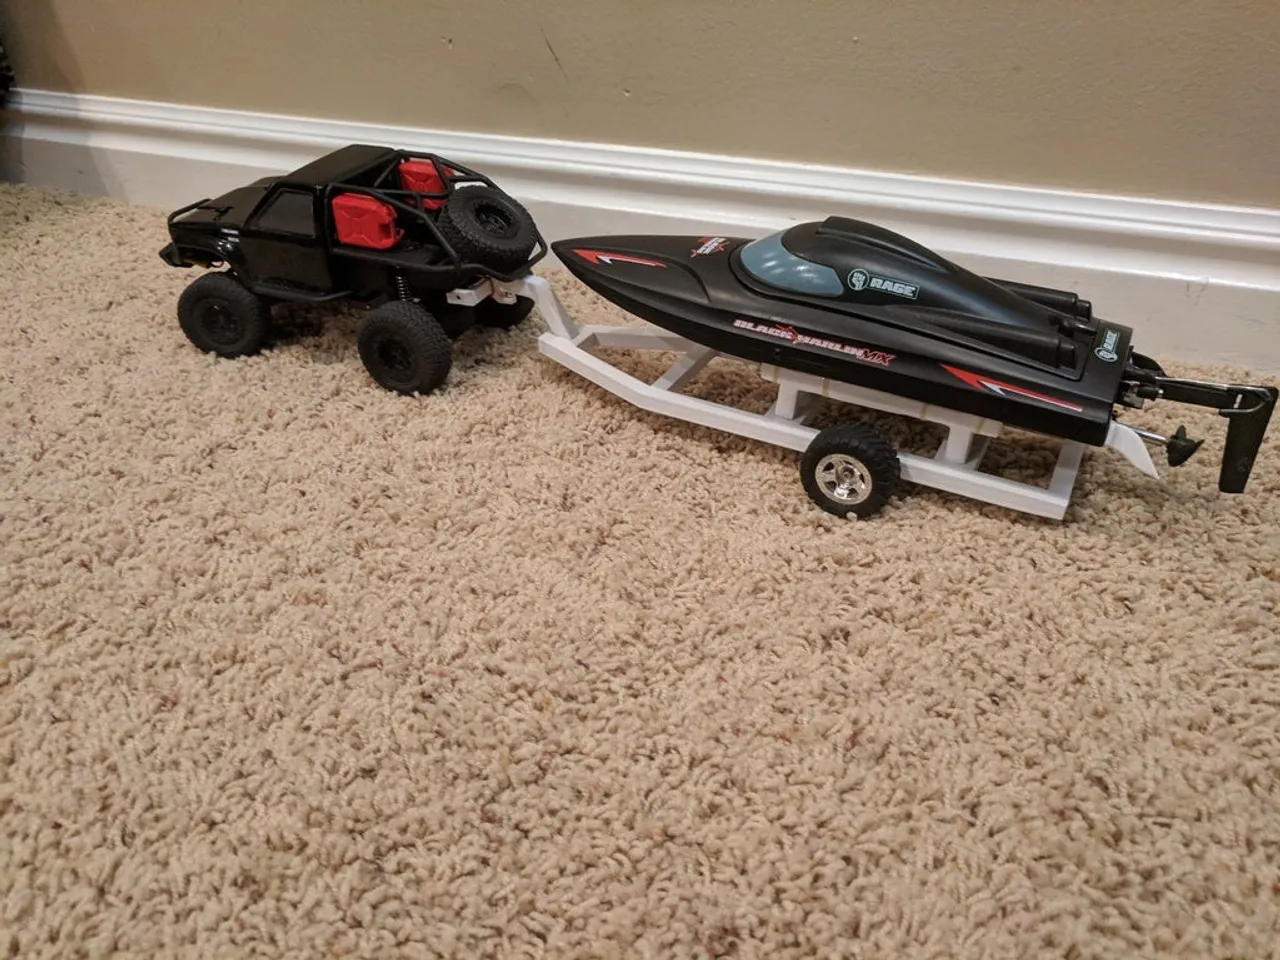 1:24 Scale RC Boat Trailer by SnobbyComa8